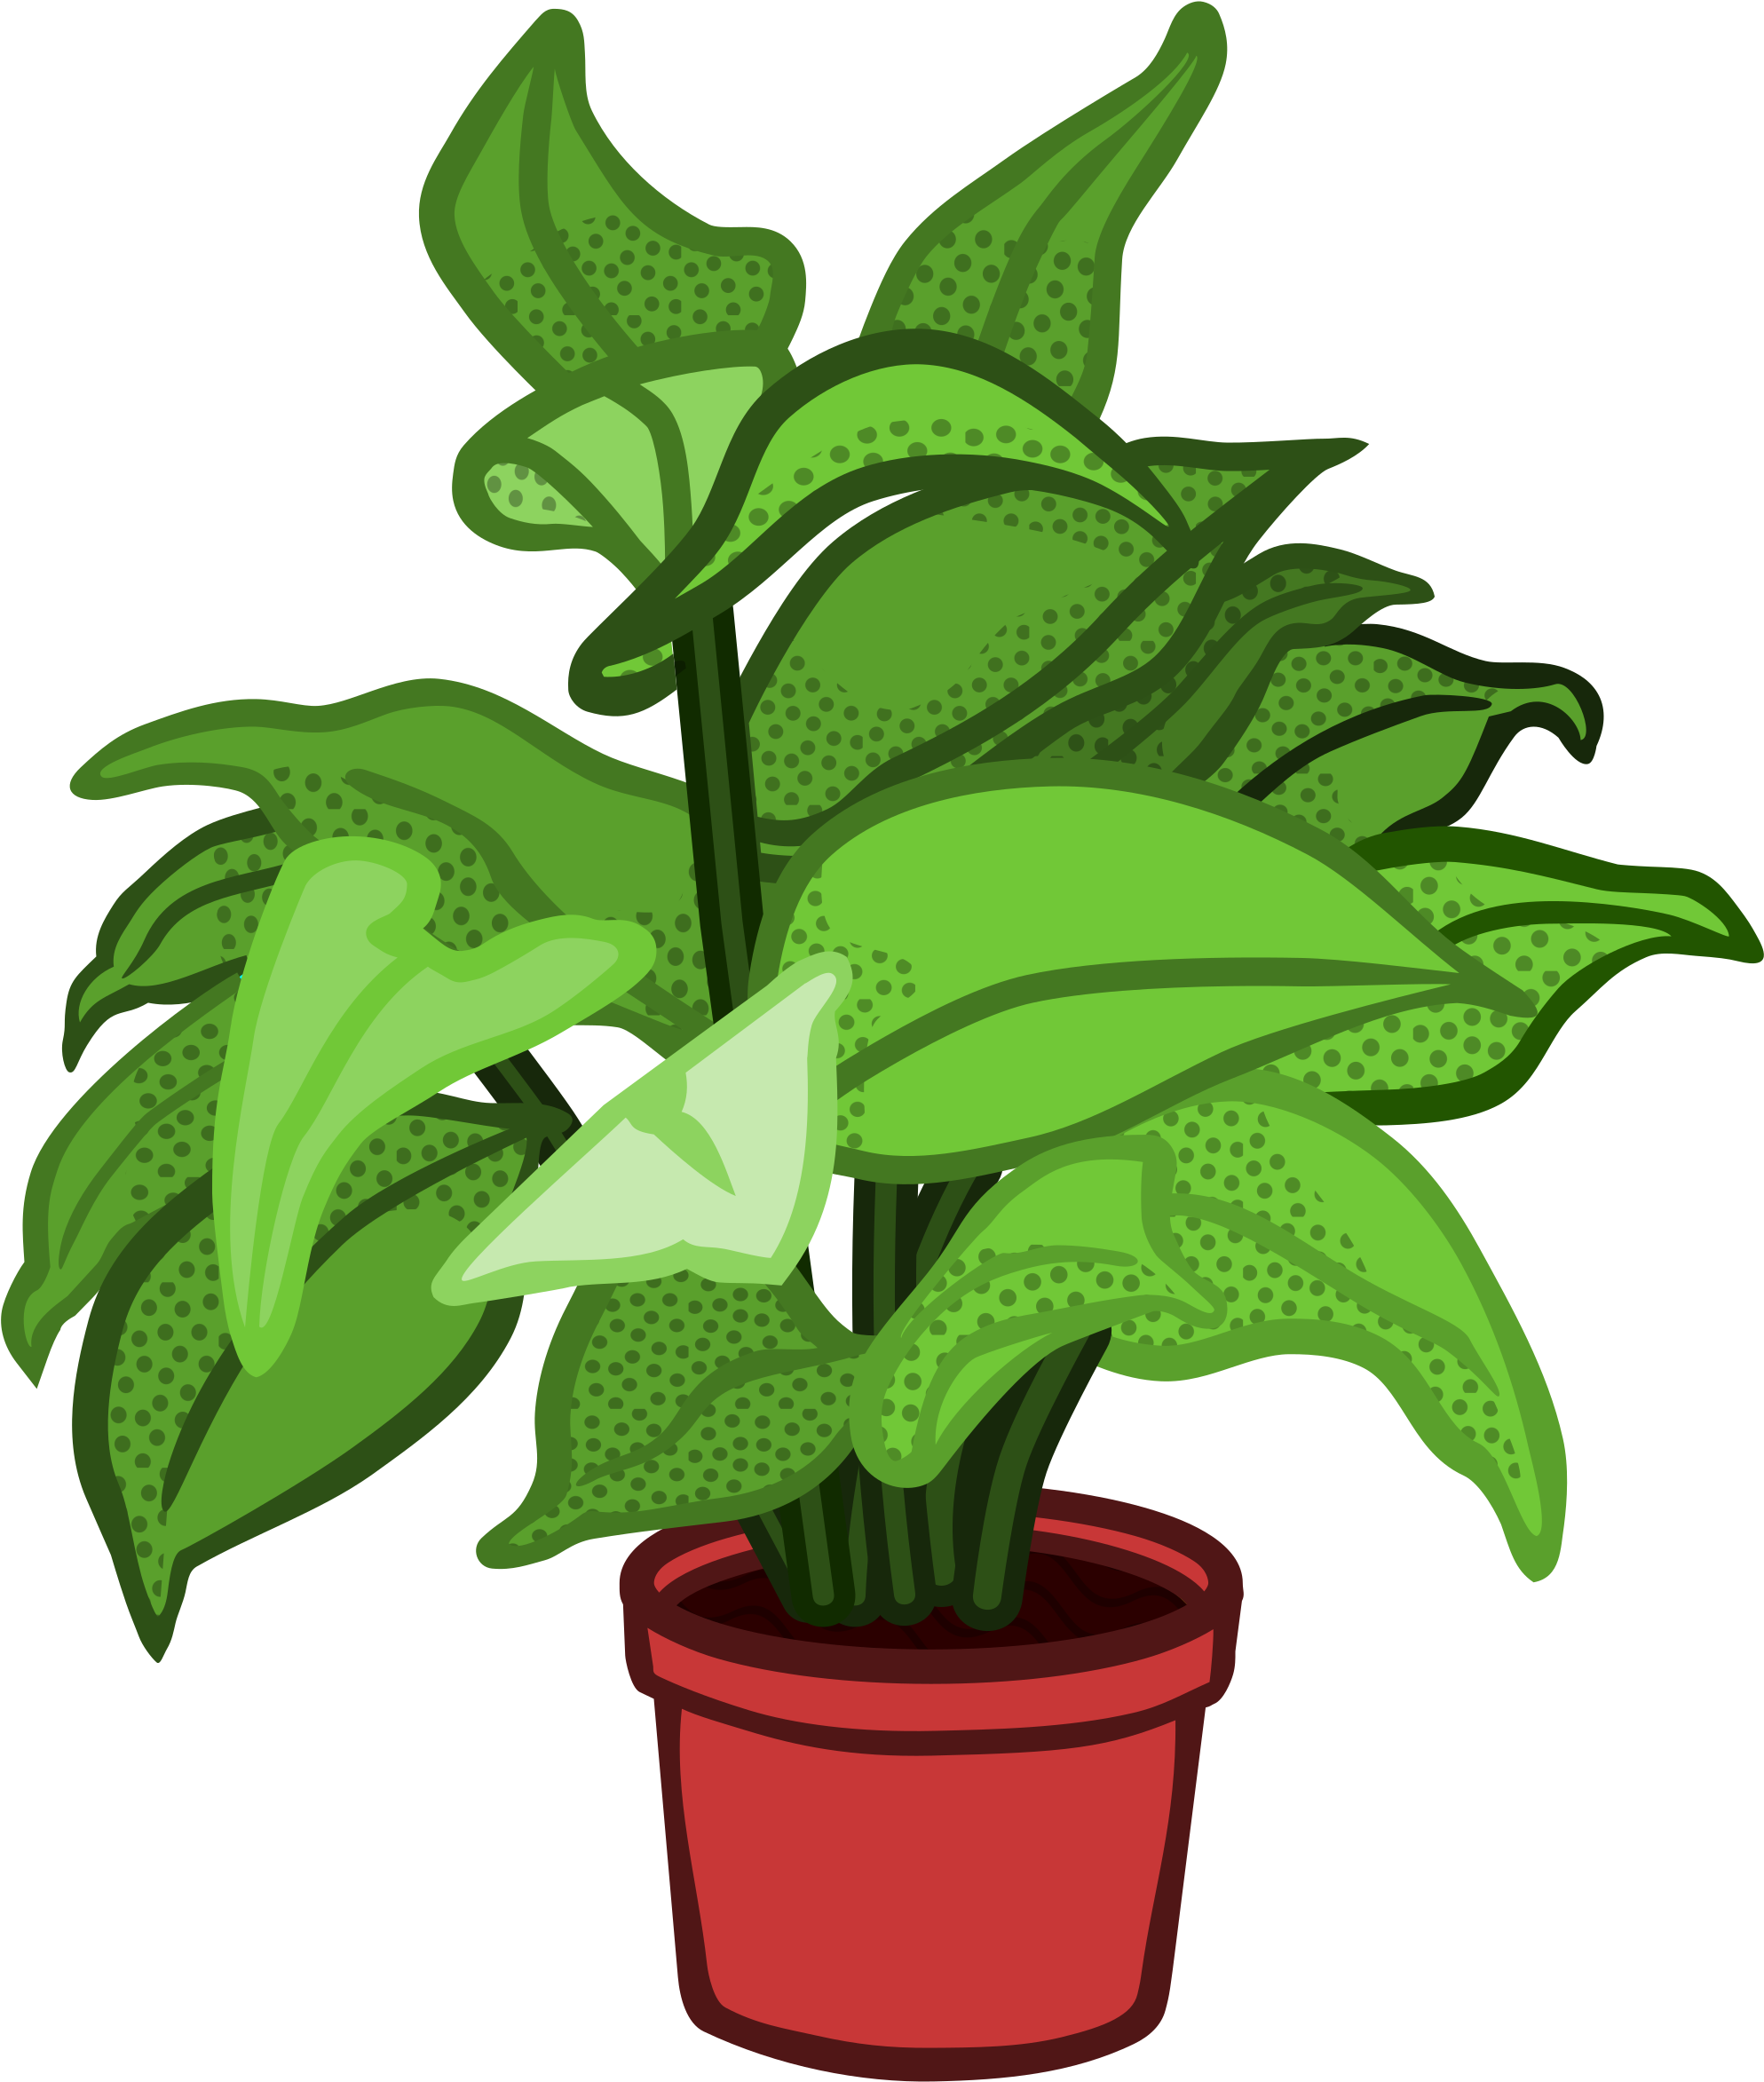 Related Potted Plants Clipart - Potted Plant Clipart (2400x2400)